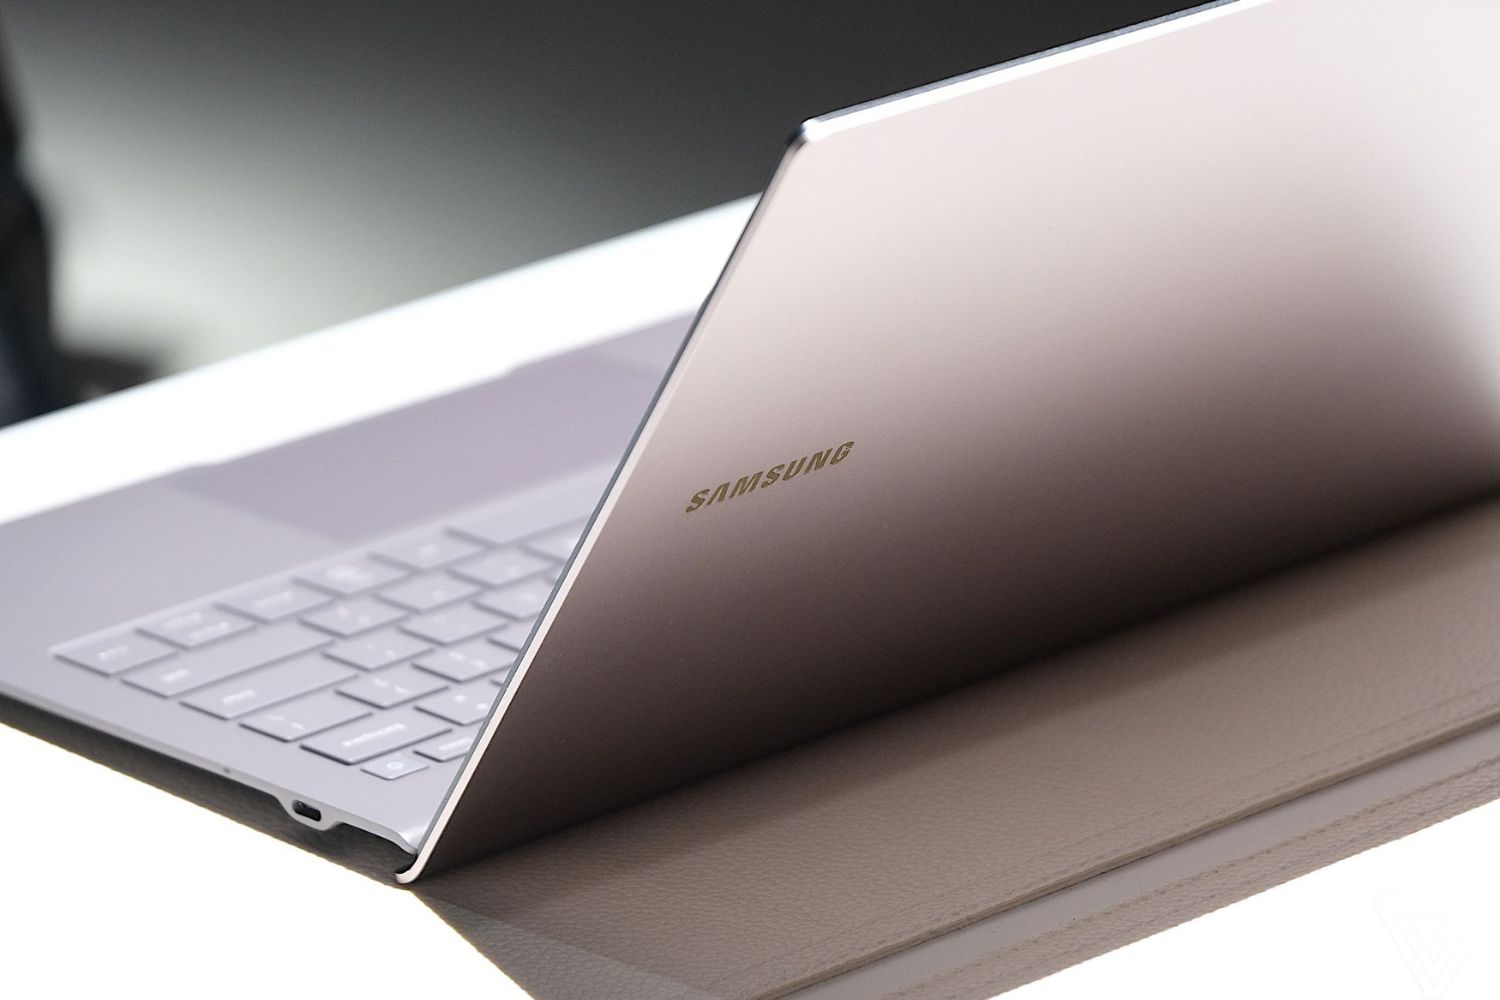 How To Restore Samsung Ultrabook To Factory Settings